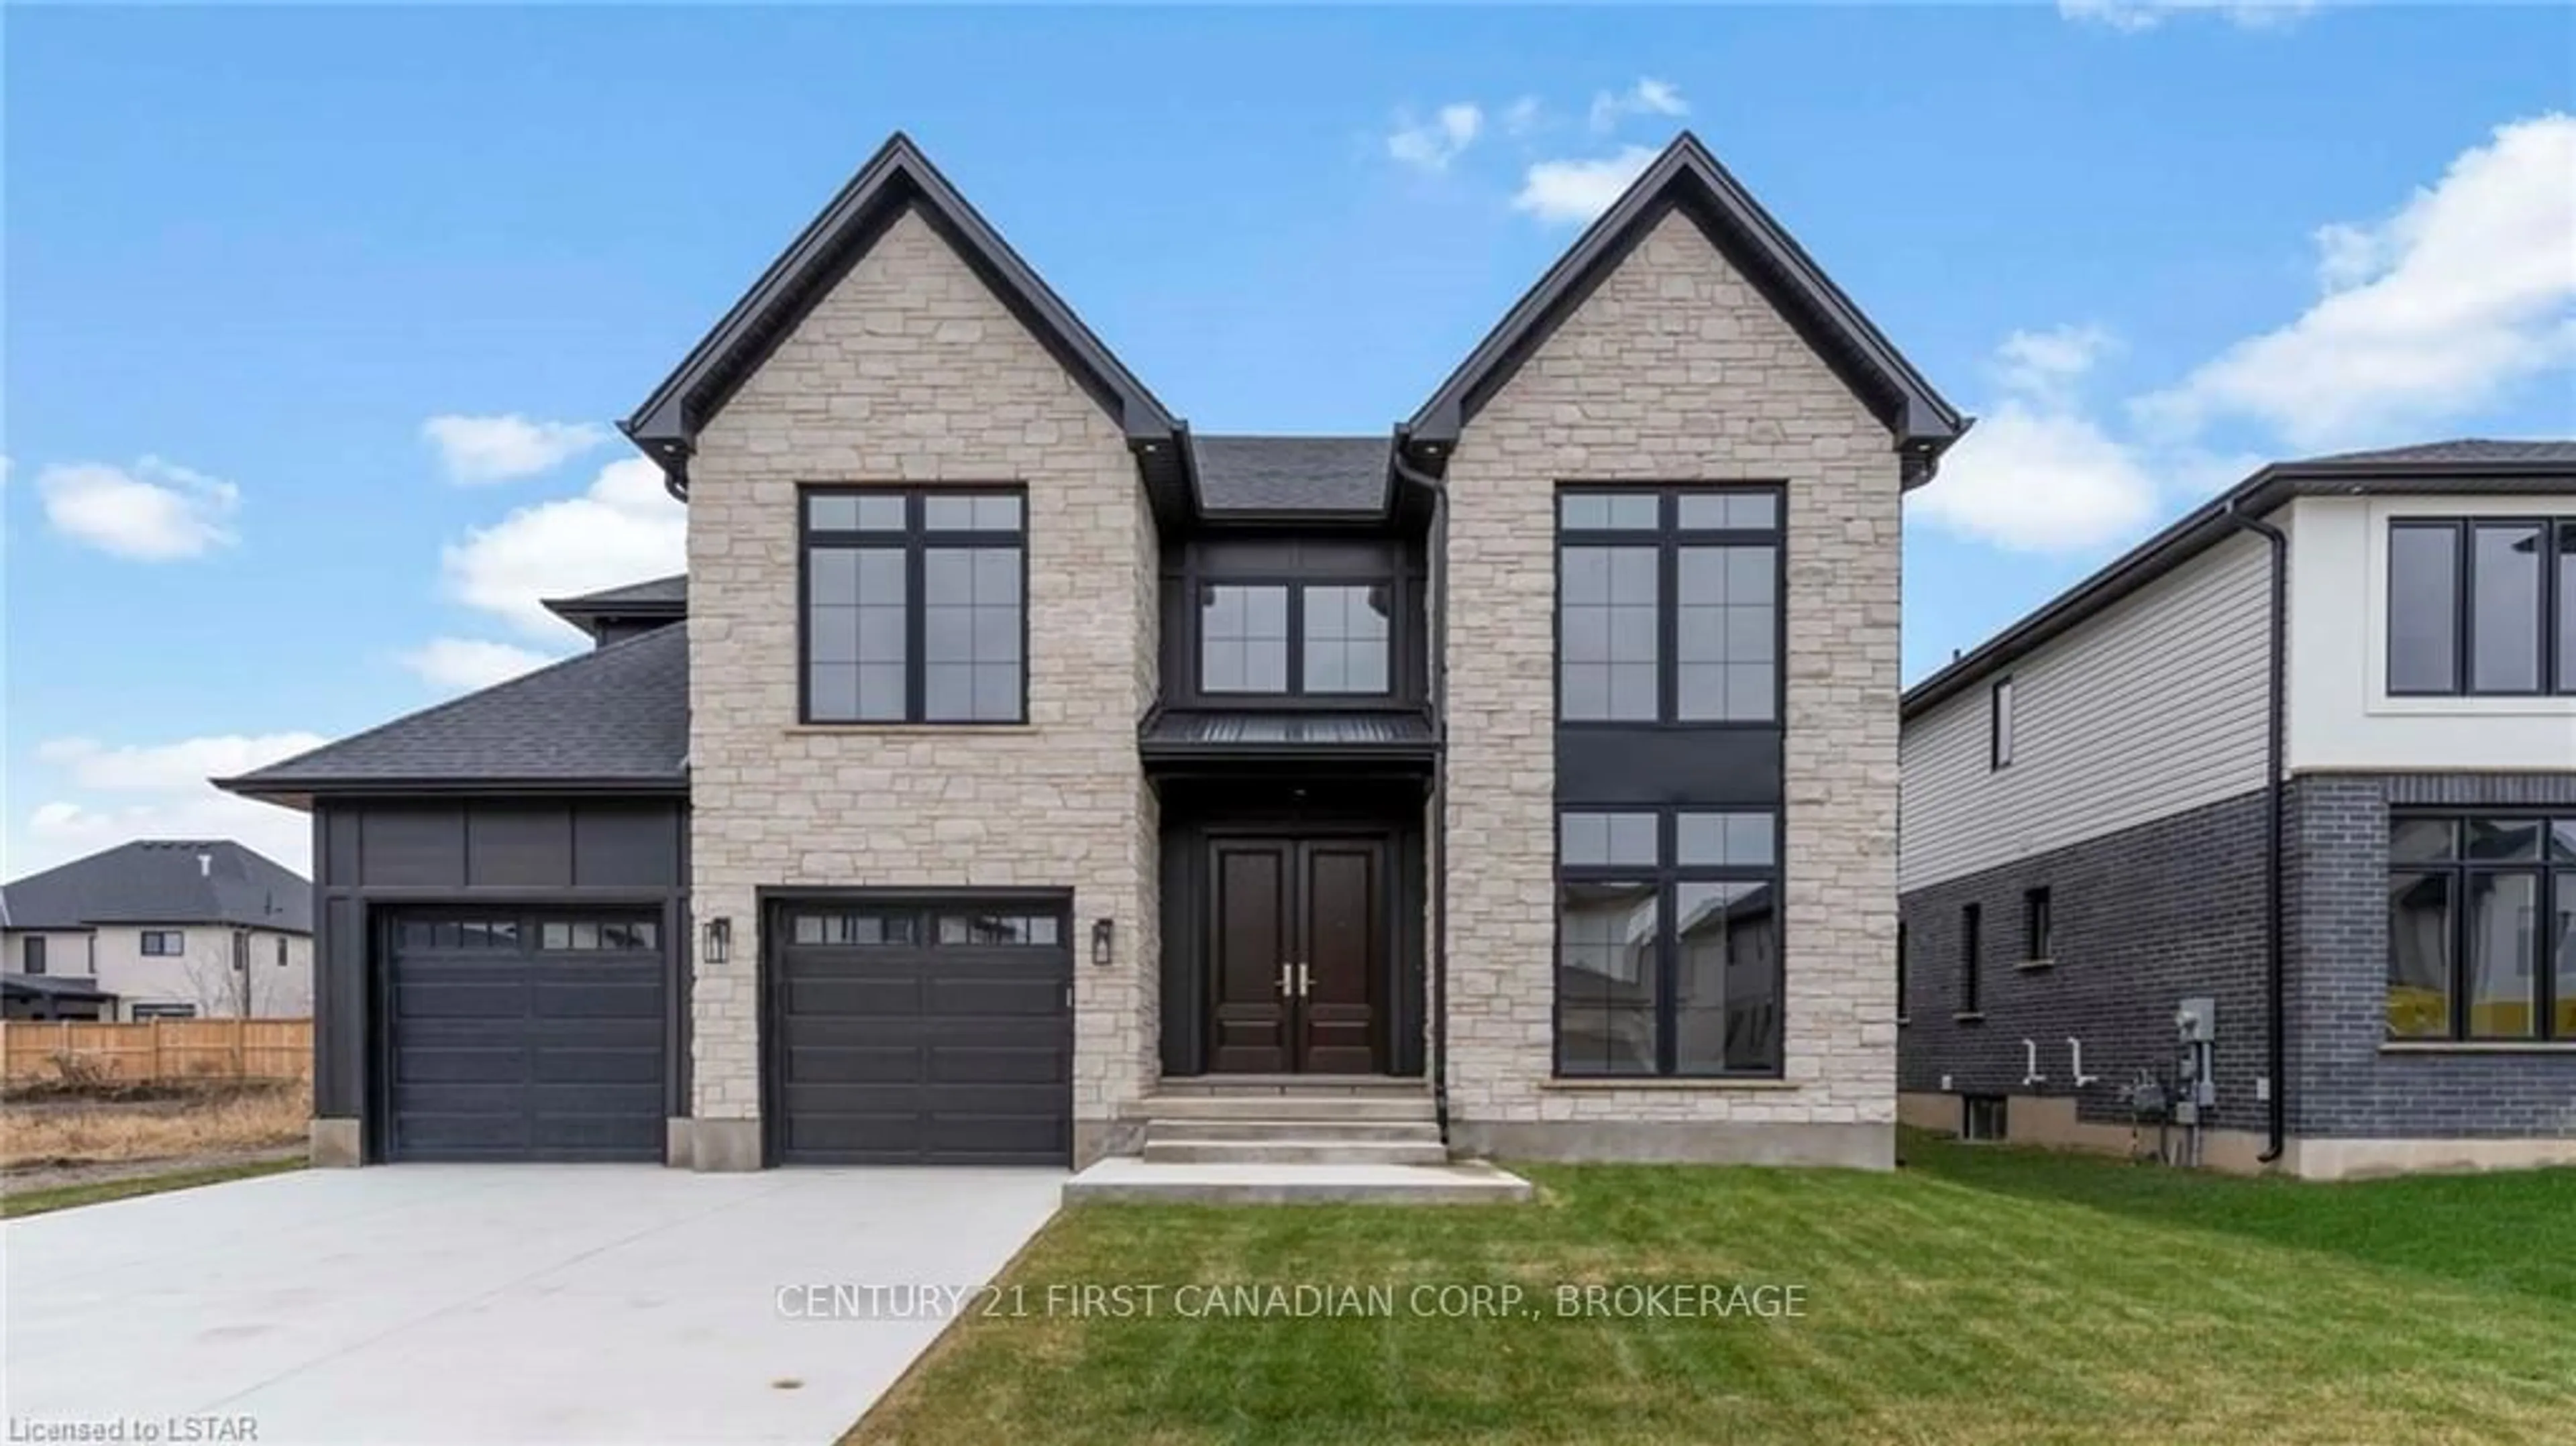 Home with brick exterior material for 3495 Isleworth Rd, London Ontario N6P 0G6